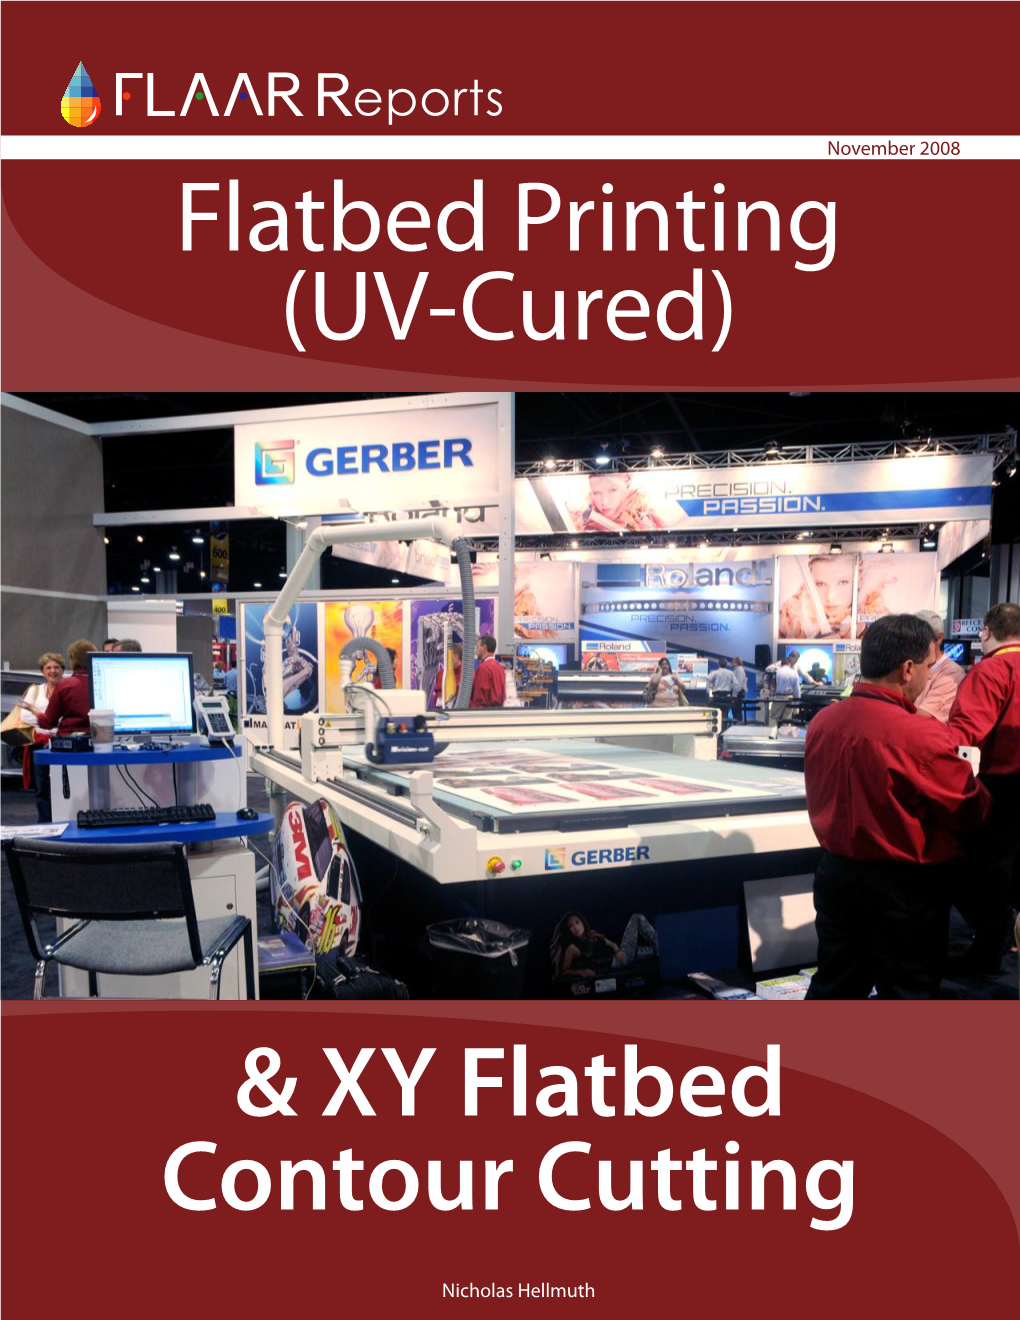 XY Flatbed Contour Cutting Flatbed Printing